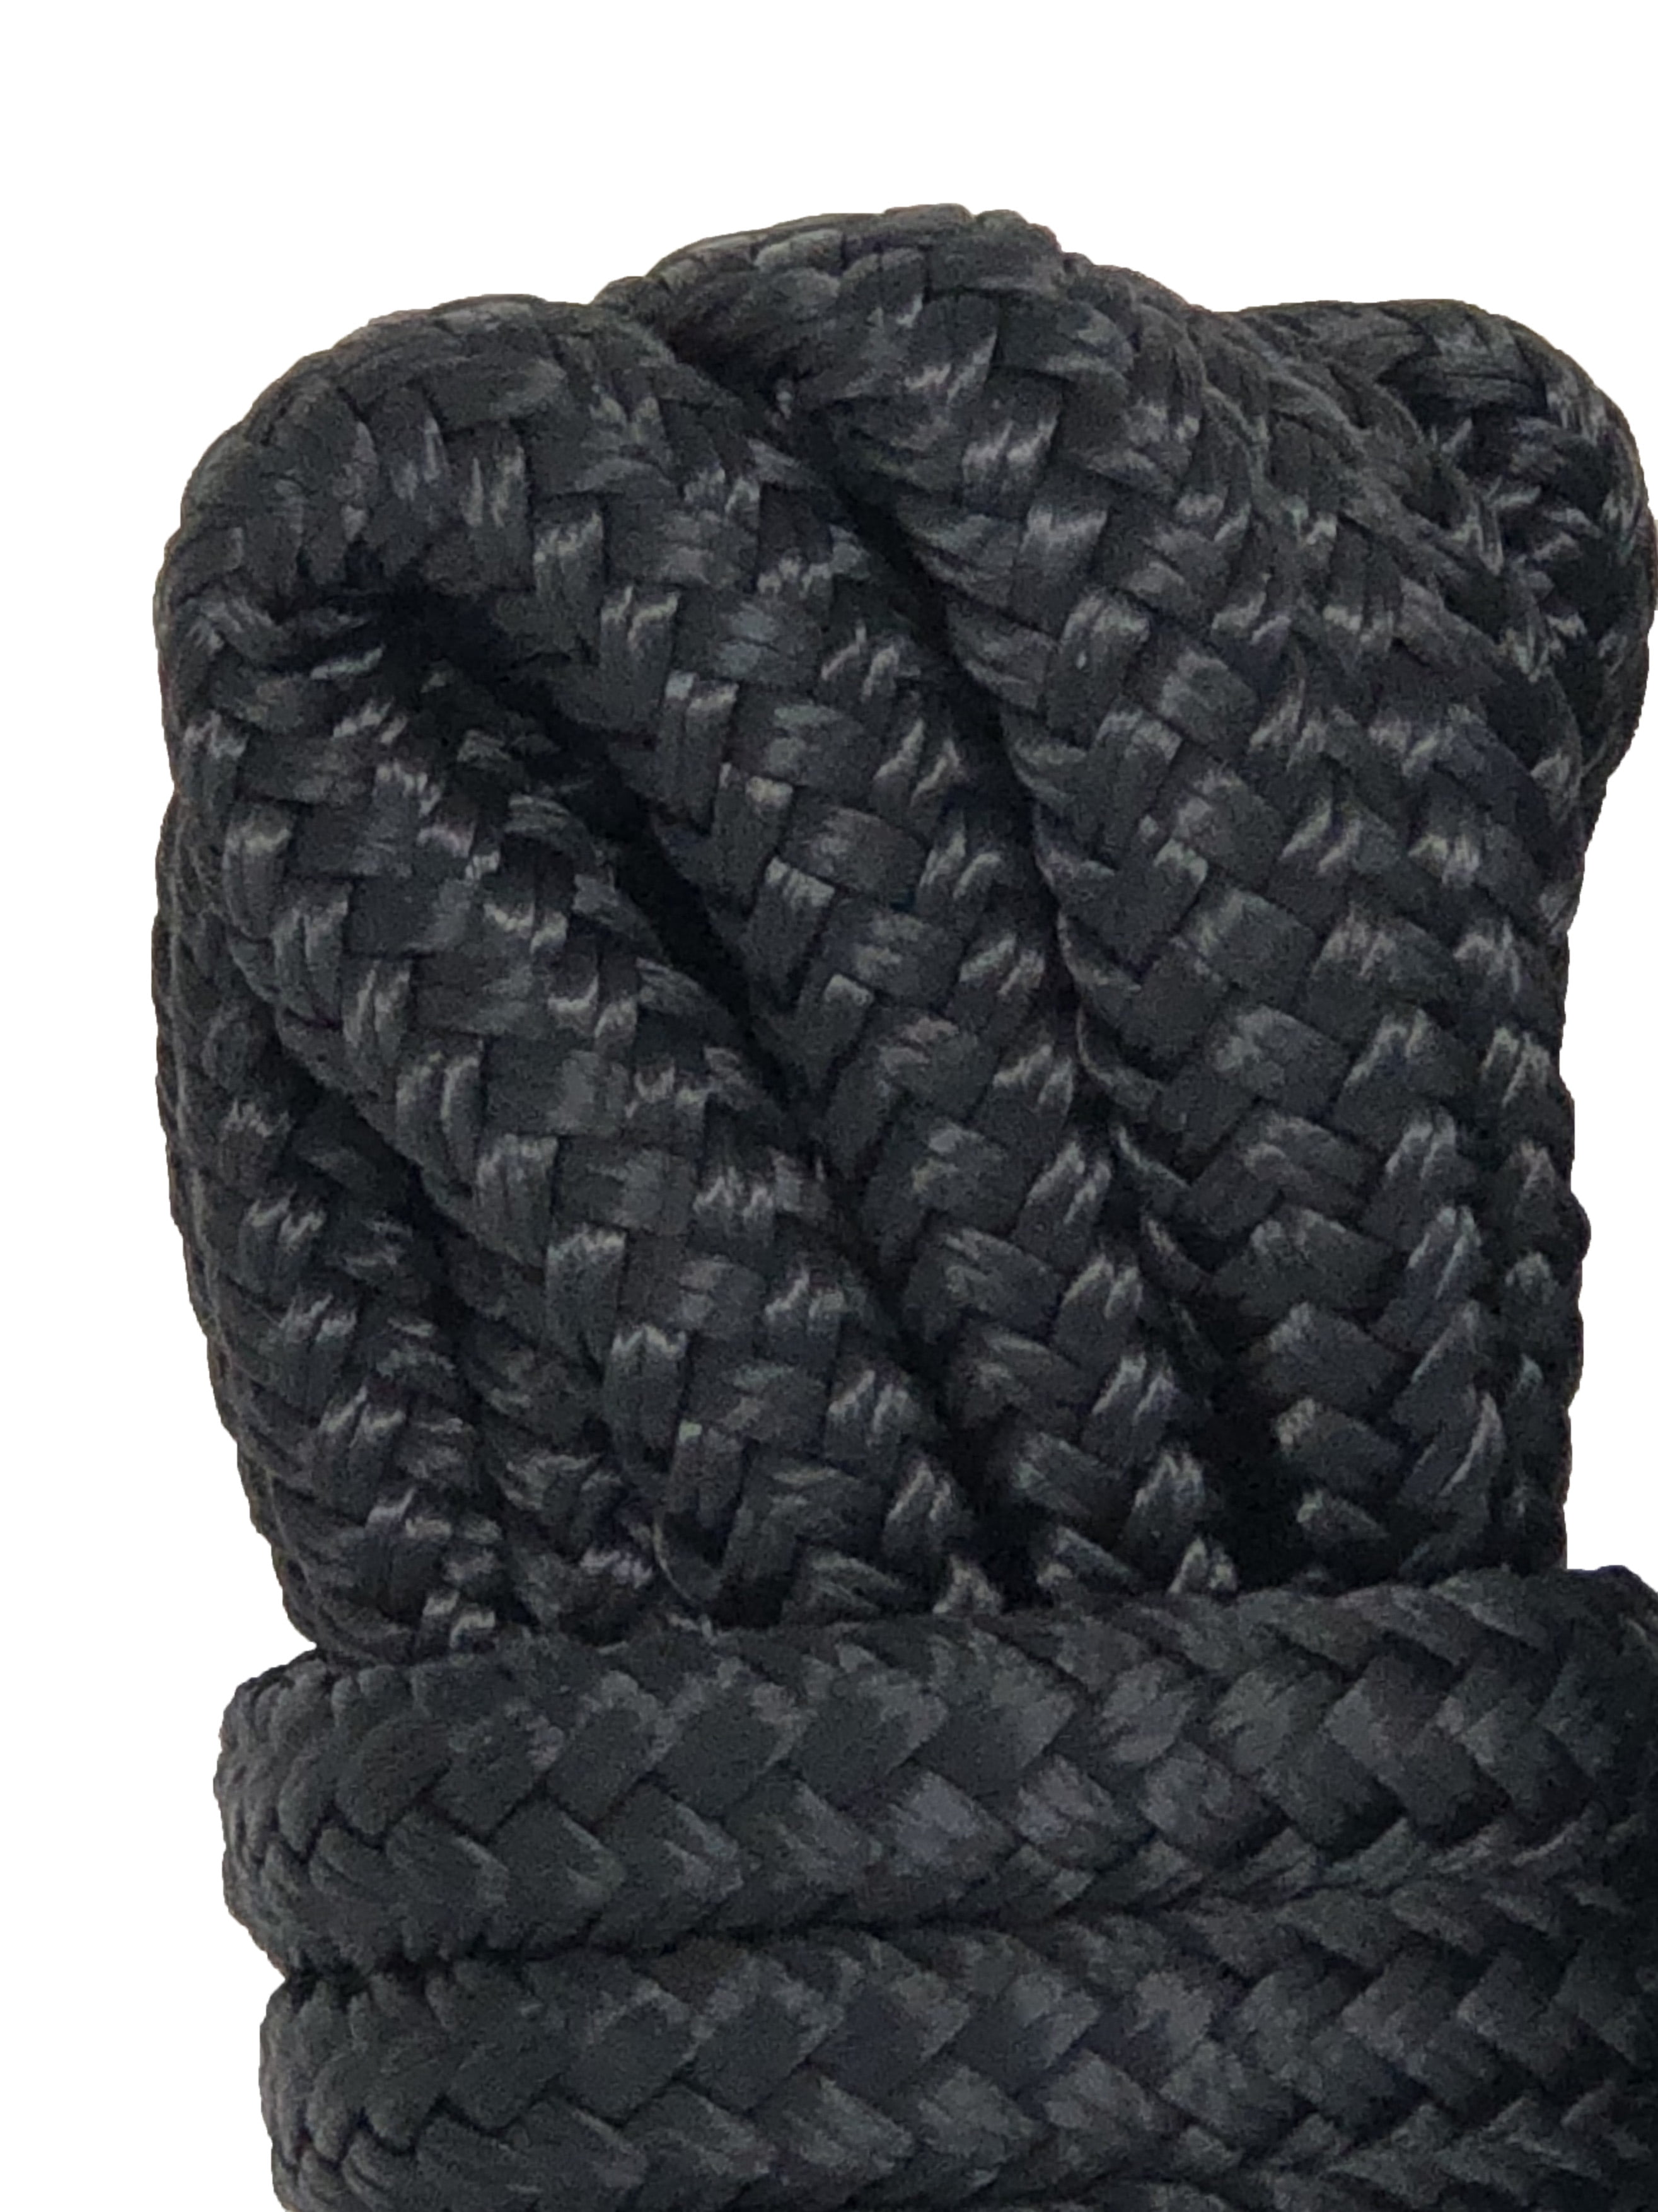 Black 2 Pack Double Braided Nylon Dock Line/Mooring Lines Avaiilable in 15 and 25 Rainier Supply Co Dock Lines Ultra Strong and Soft Double Braided Nylon Boat Ropes with 12 eyelet